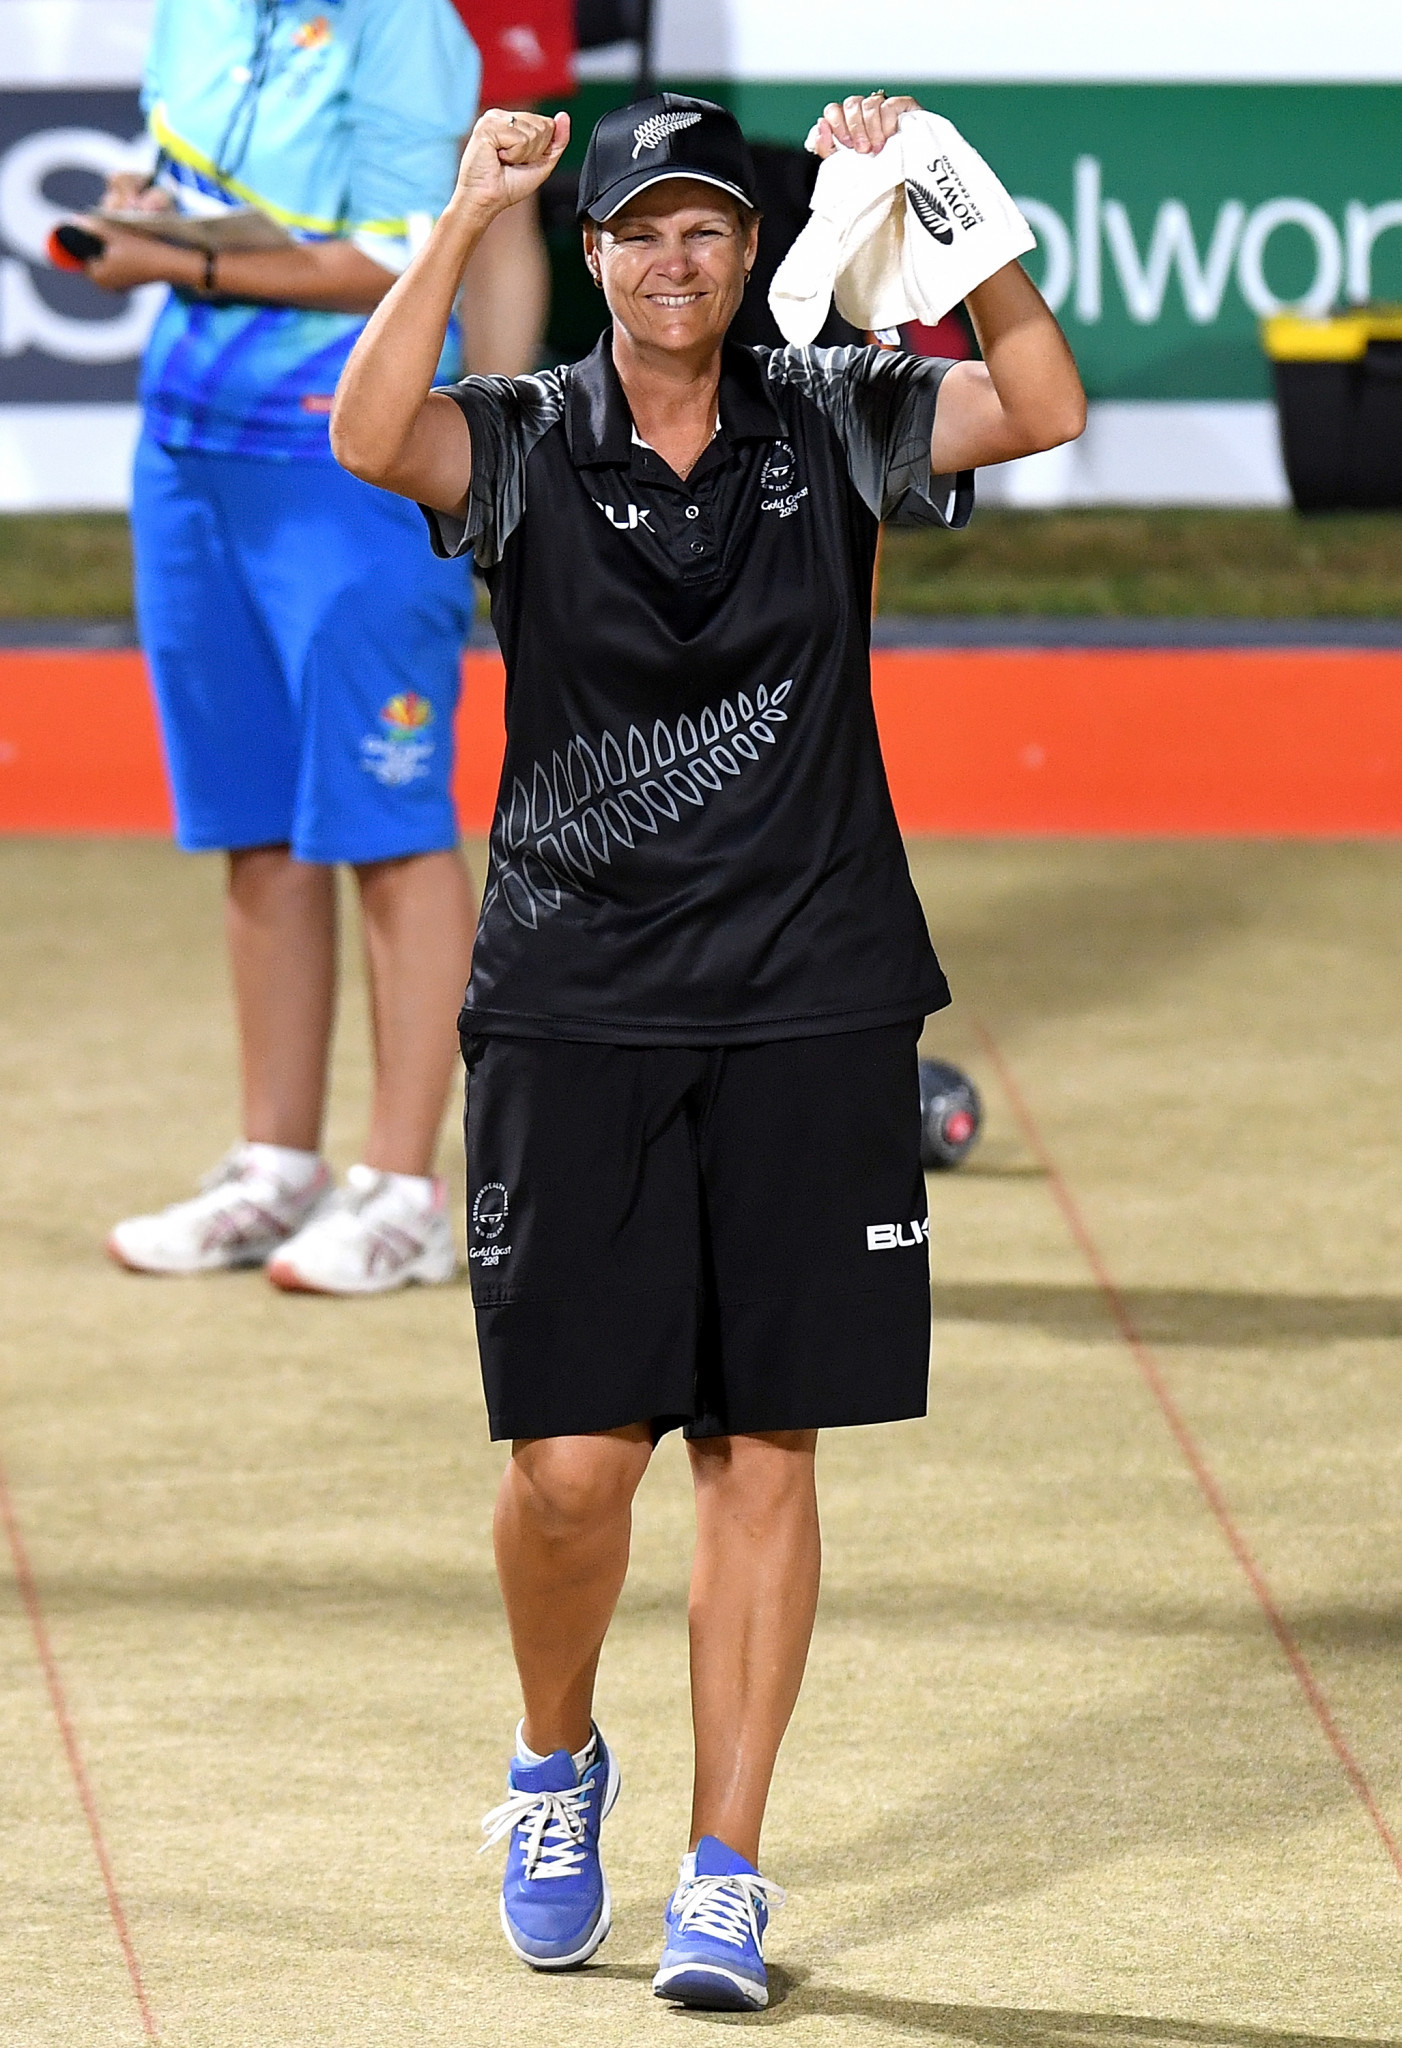 Jo Edwards of New Zealand has finished top of the women's section one at the World Bowls Singles Champion of Champions to automatically qualify for the semi-finals ©Getty Images